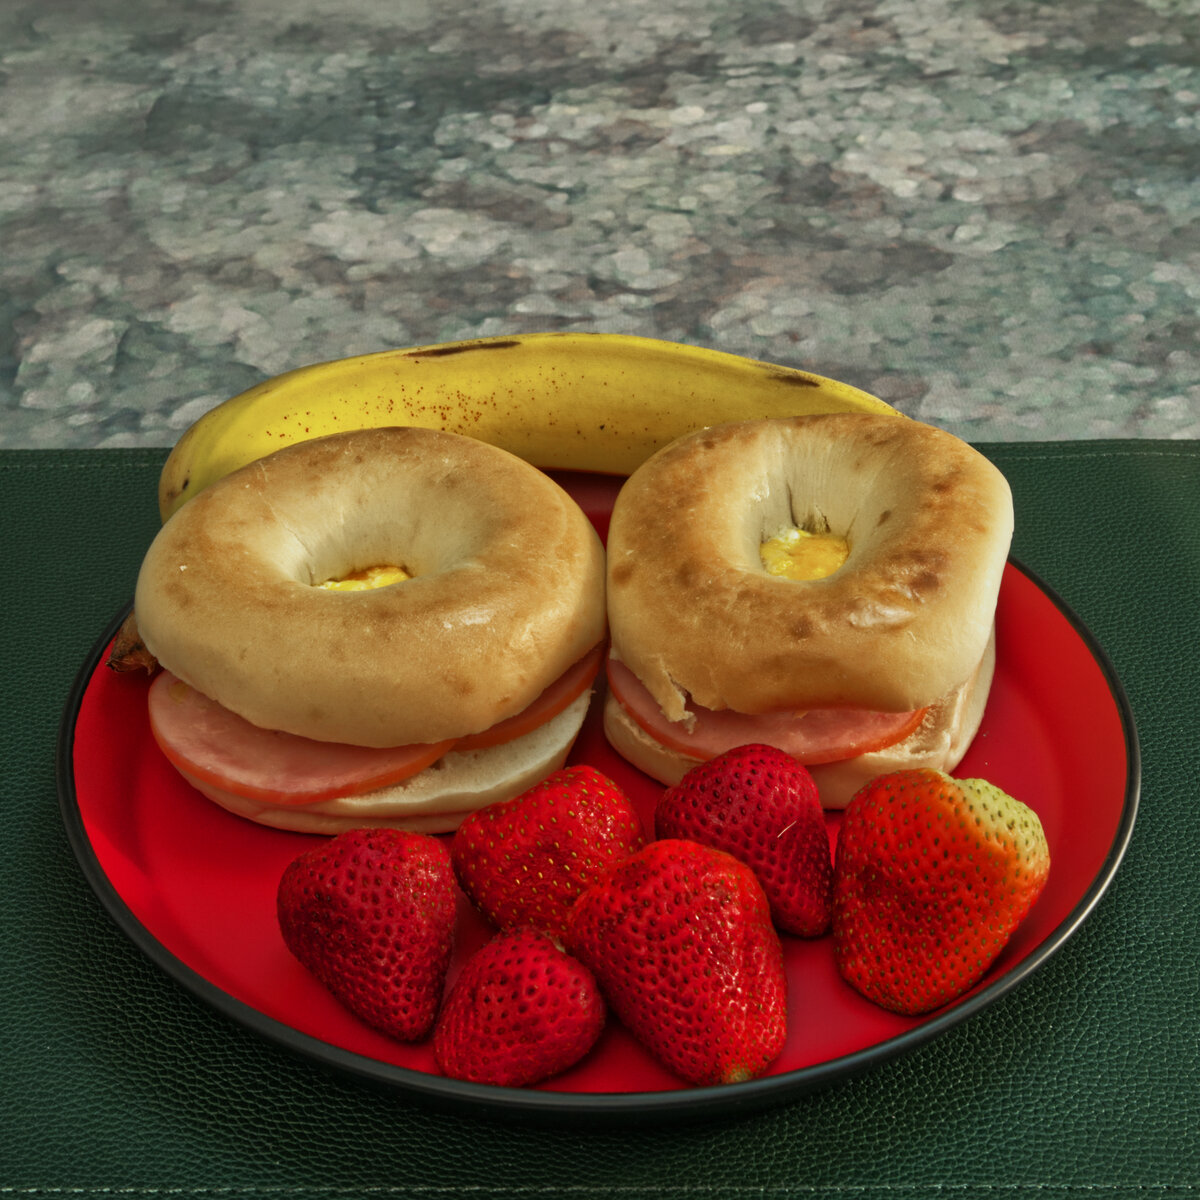 Canadian Bacon and Egg Bagles with Strawberries and a Banana